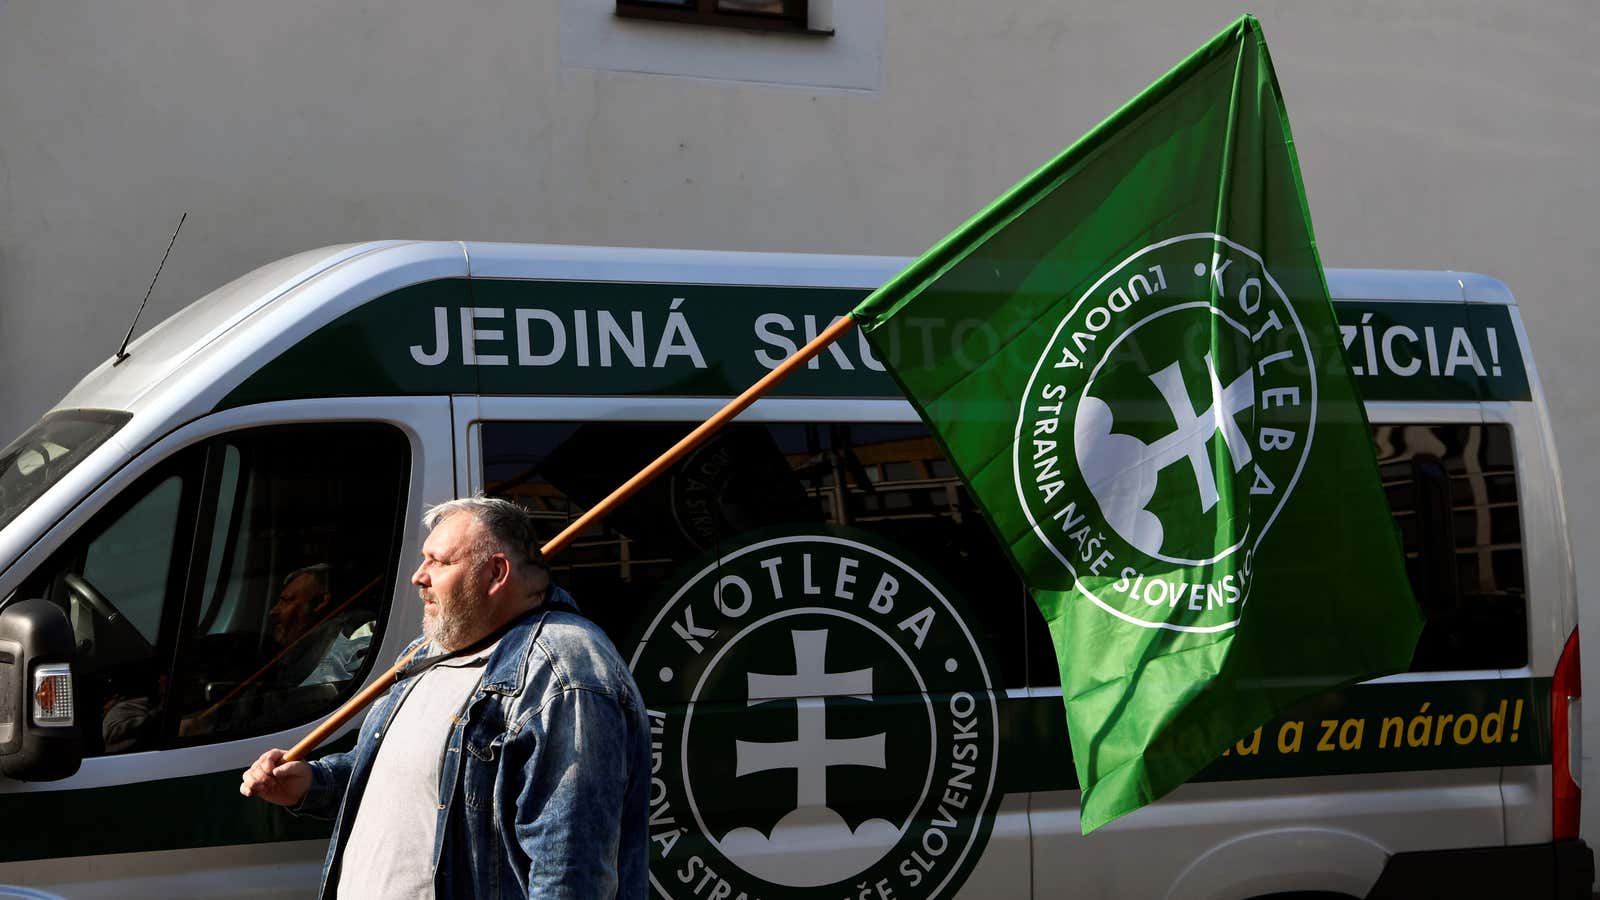 The far-right is rising in Slovakia.